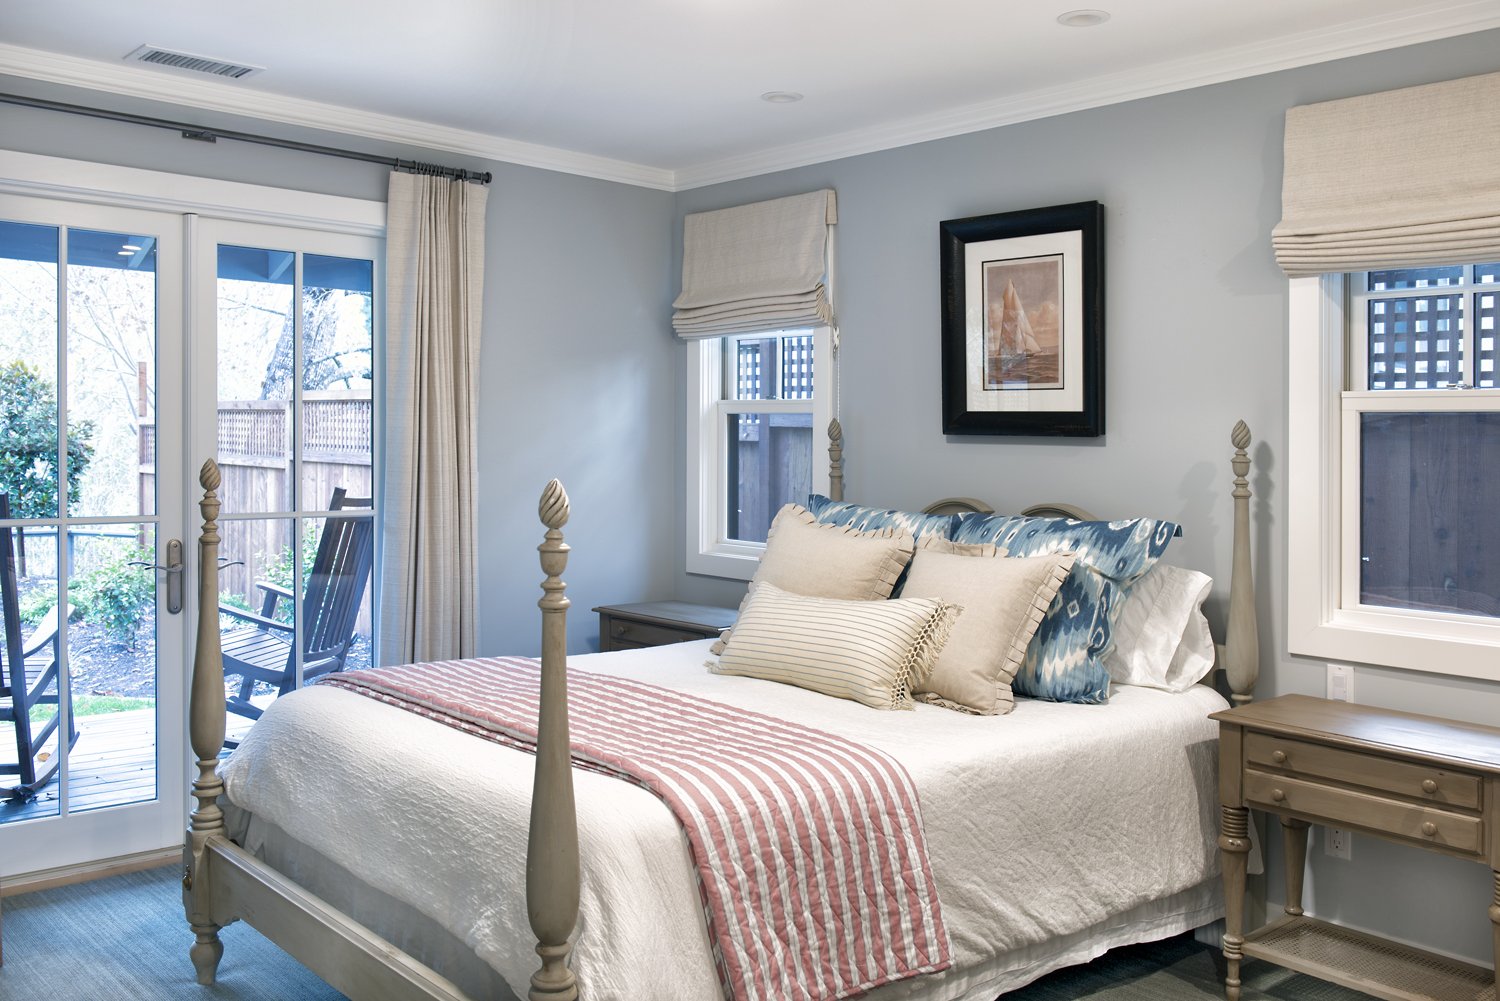  A bedroom with windows to the yard. The bed has vintage-style posts and patterned linens.  